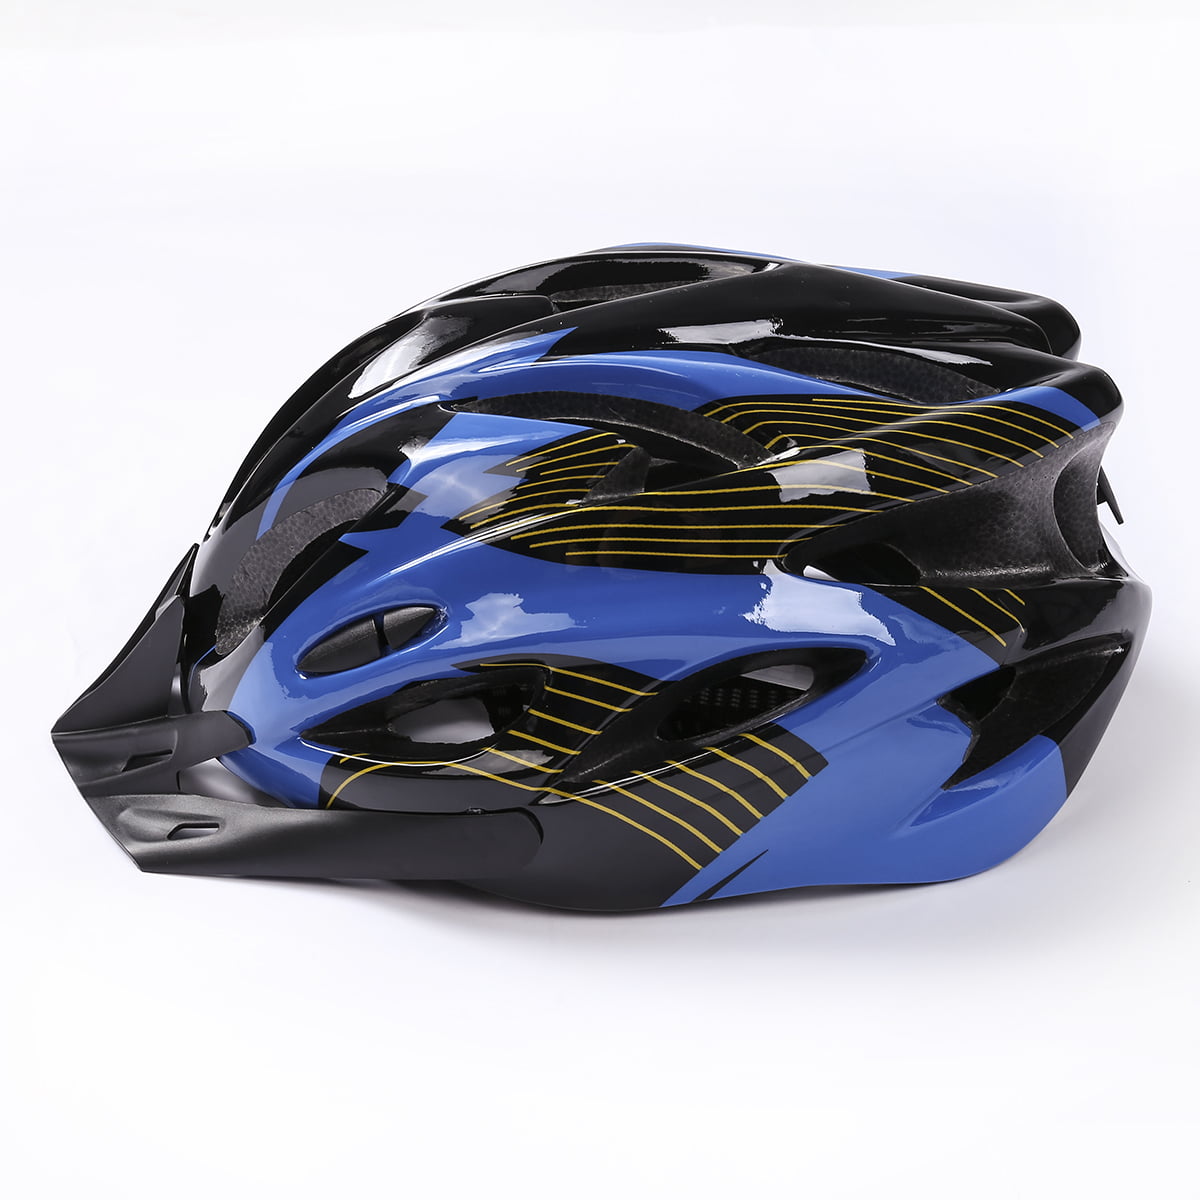 NEW Bicycle Helmet Bike Cycling Adult Adjustable Outdoor Sports Safety Helmets 